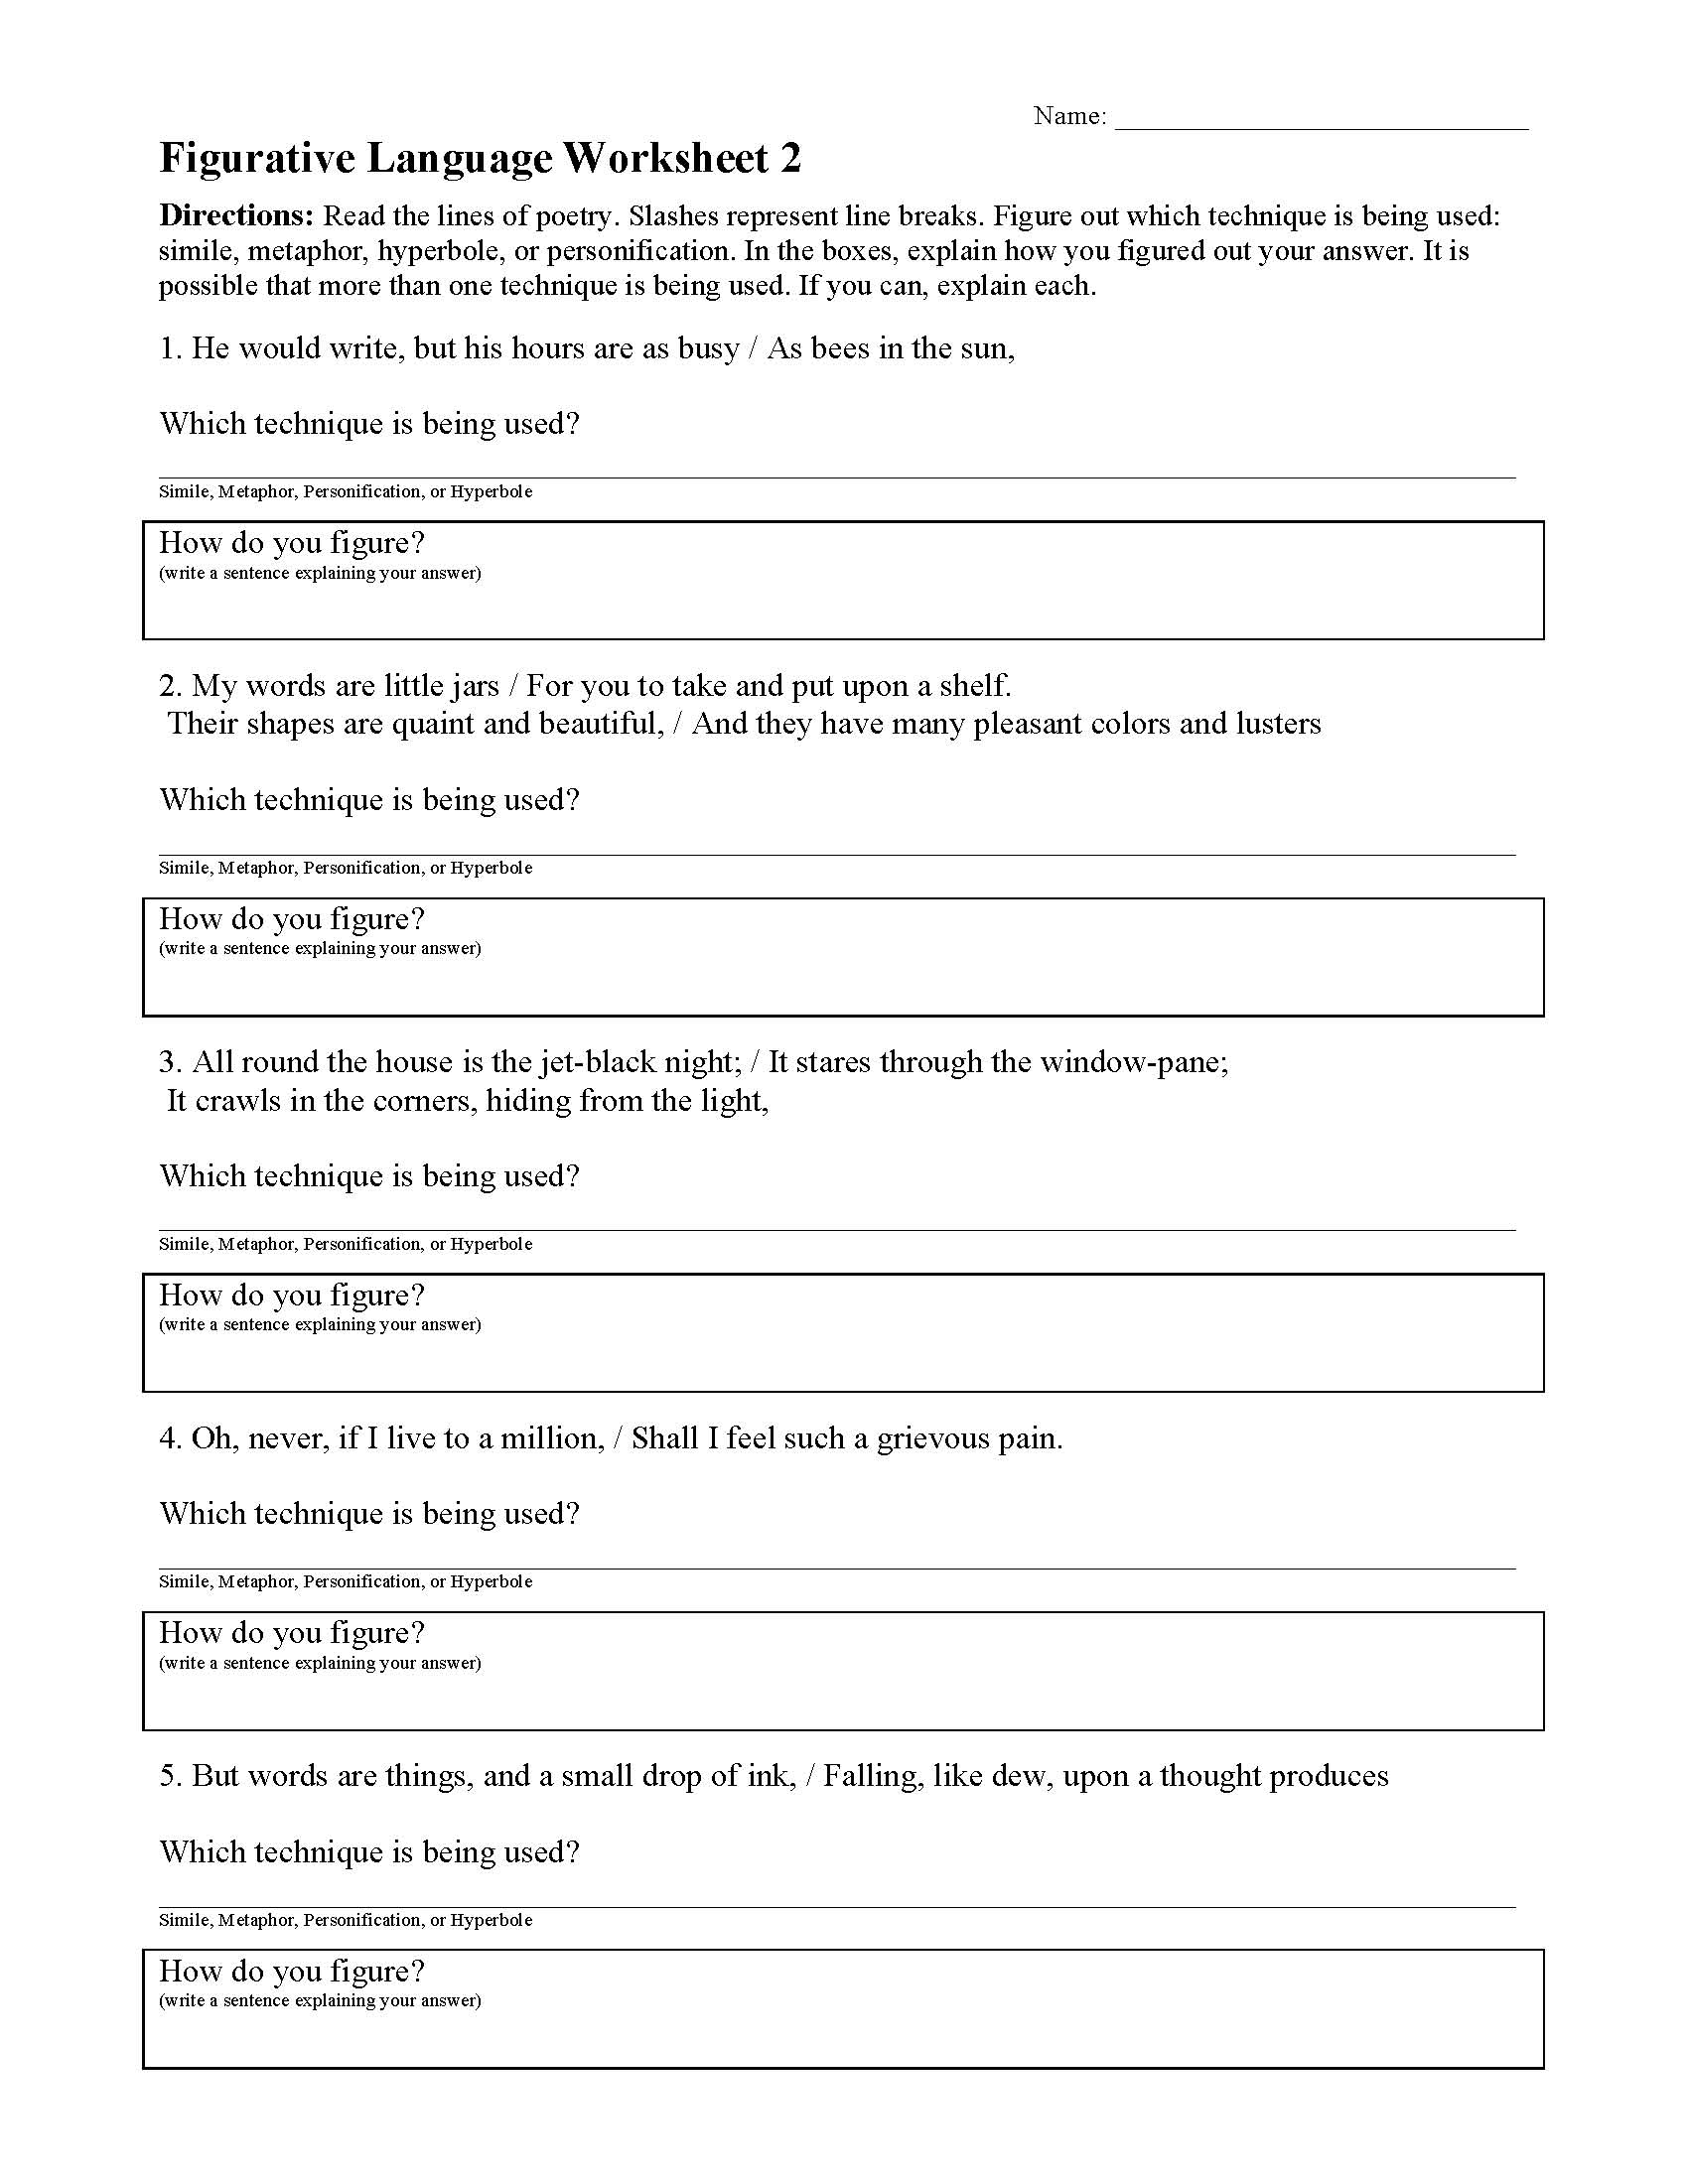 This is a preview image of Figurative Language Worksheet 2. Click on it to enlarge it or view the source file.